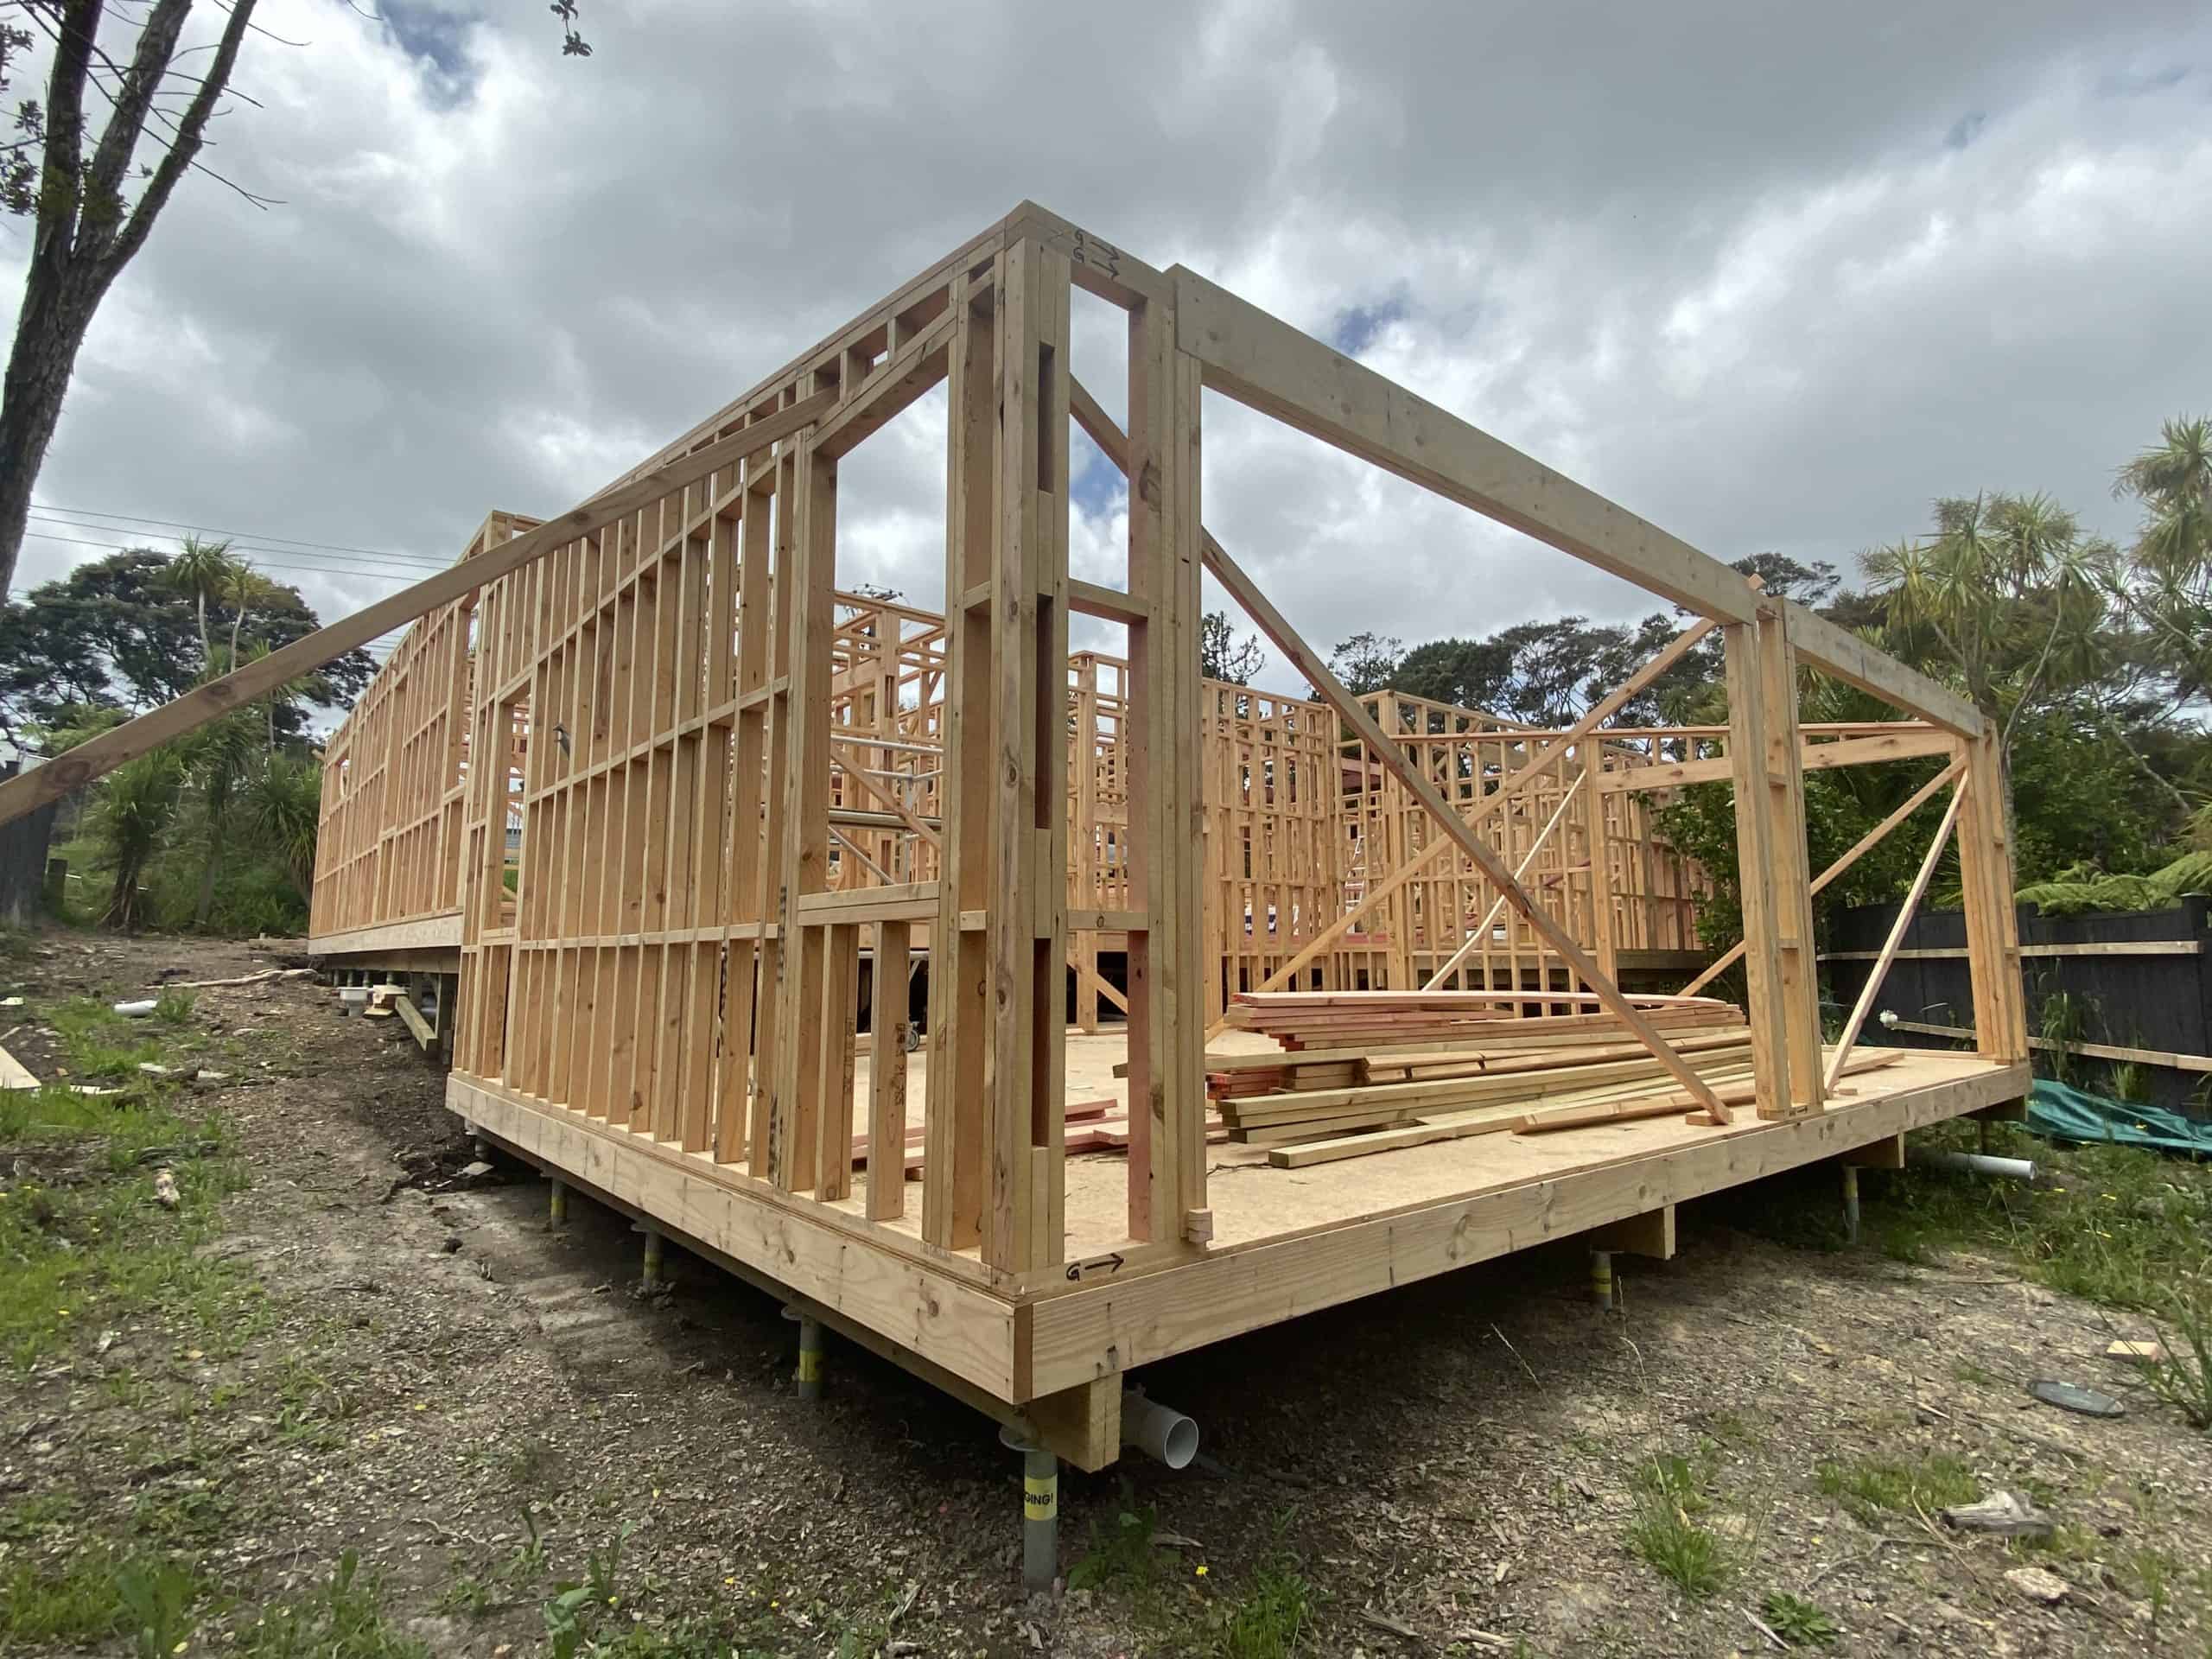 What are the benefits of timber frame construction?